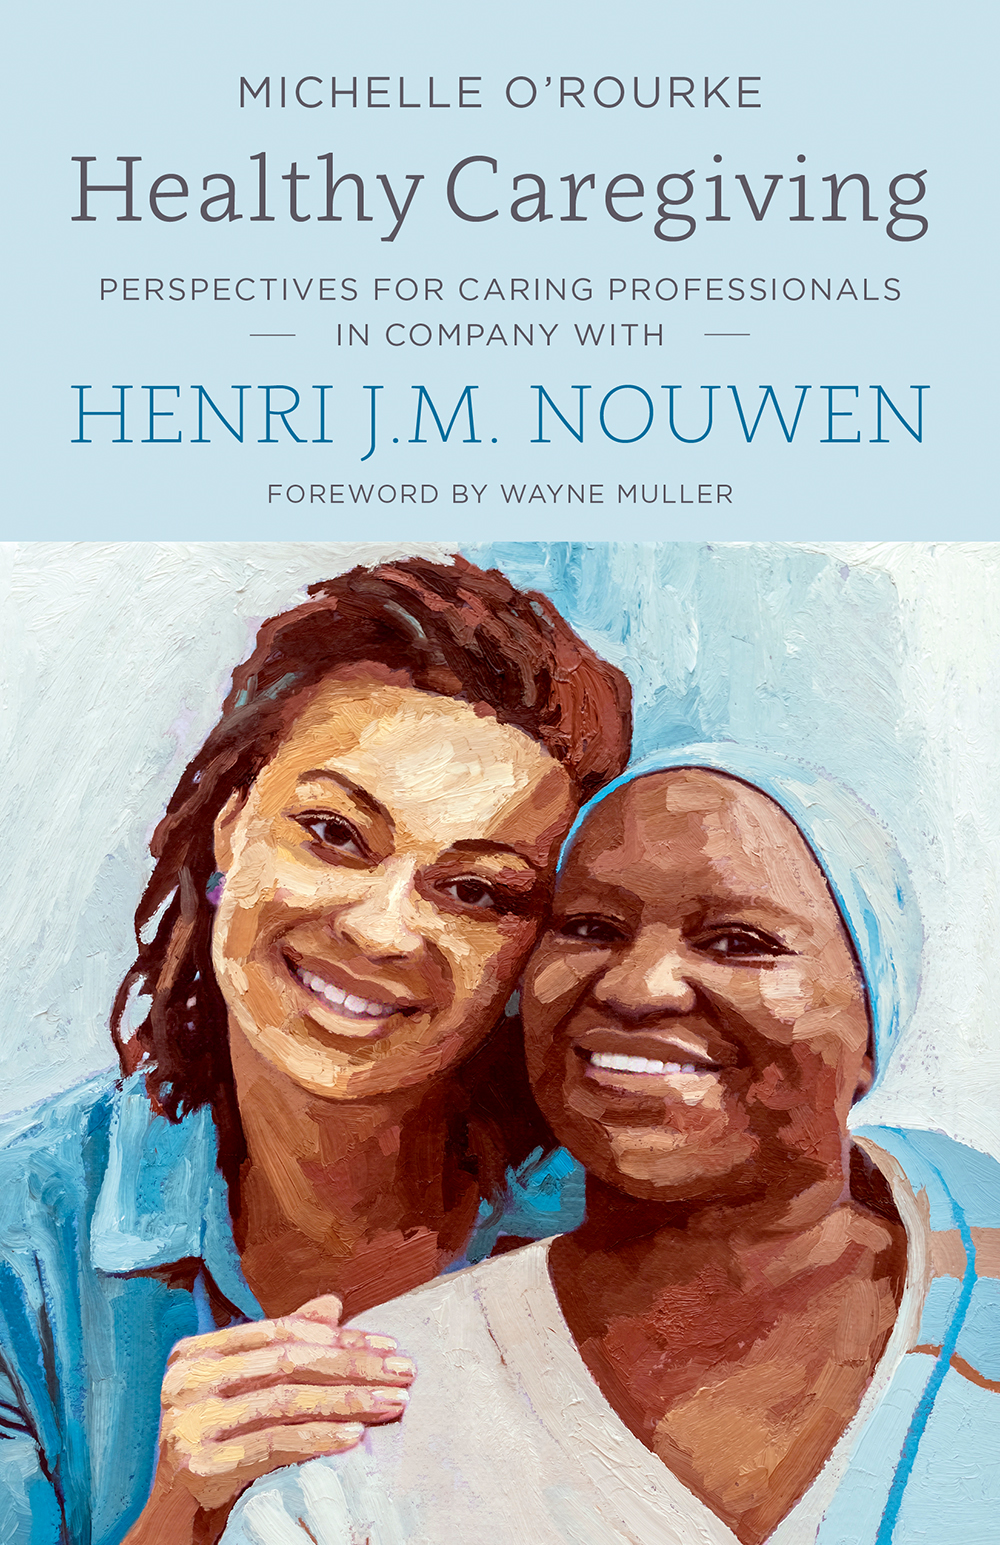 Healthy Caregiving, Perspectives for Caring Professionals in Company with Henri J. M. Nouwen